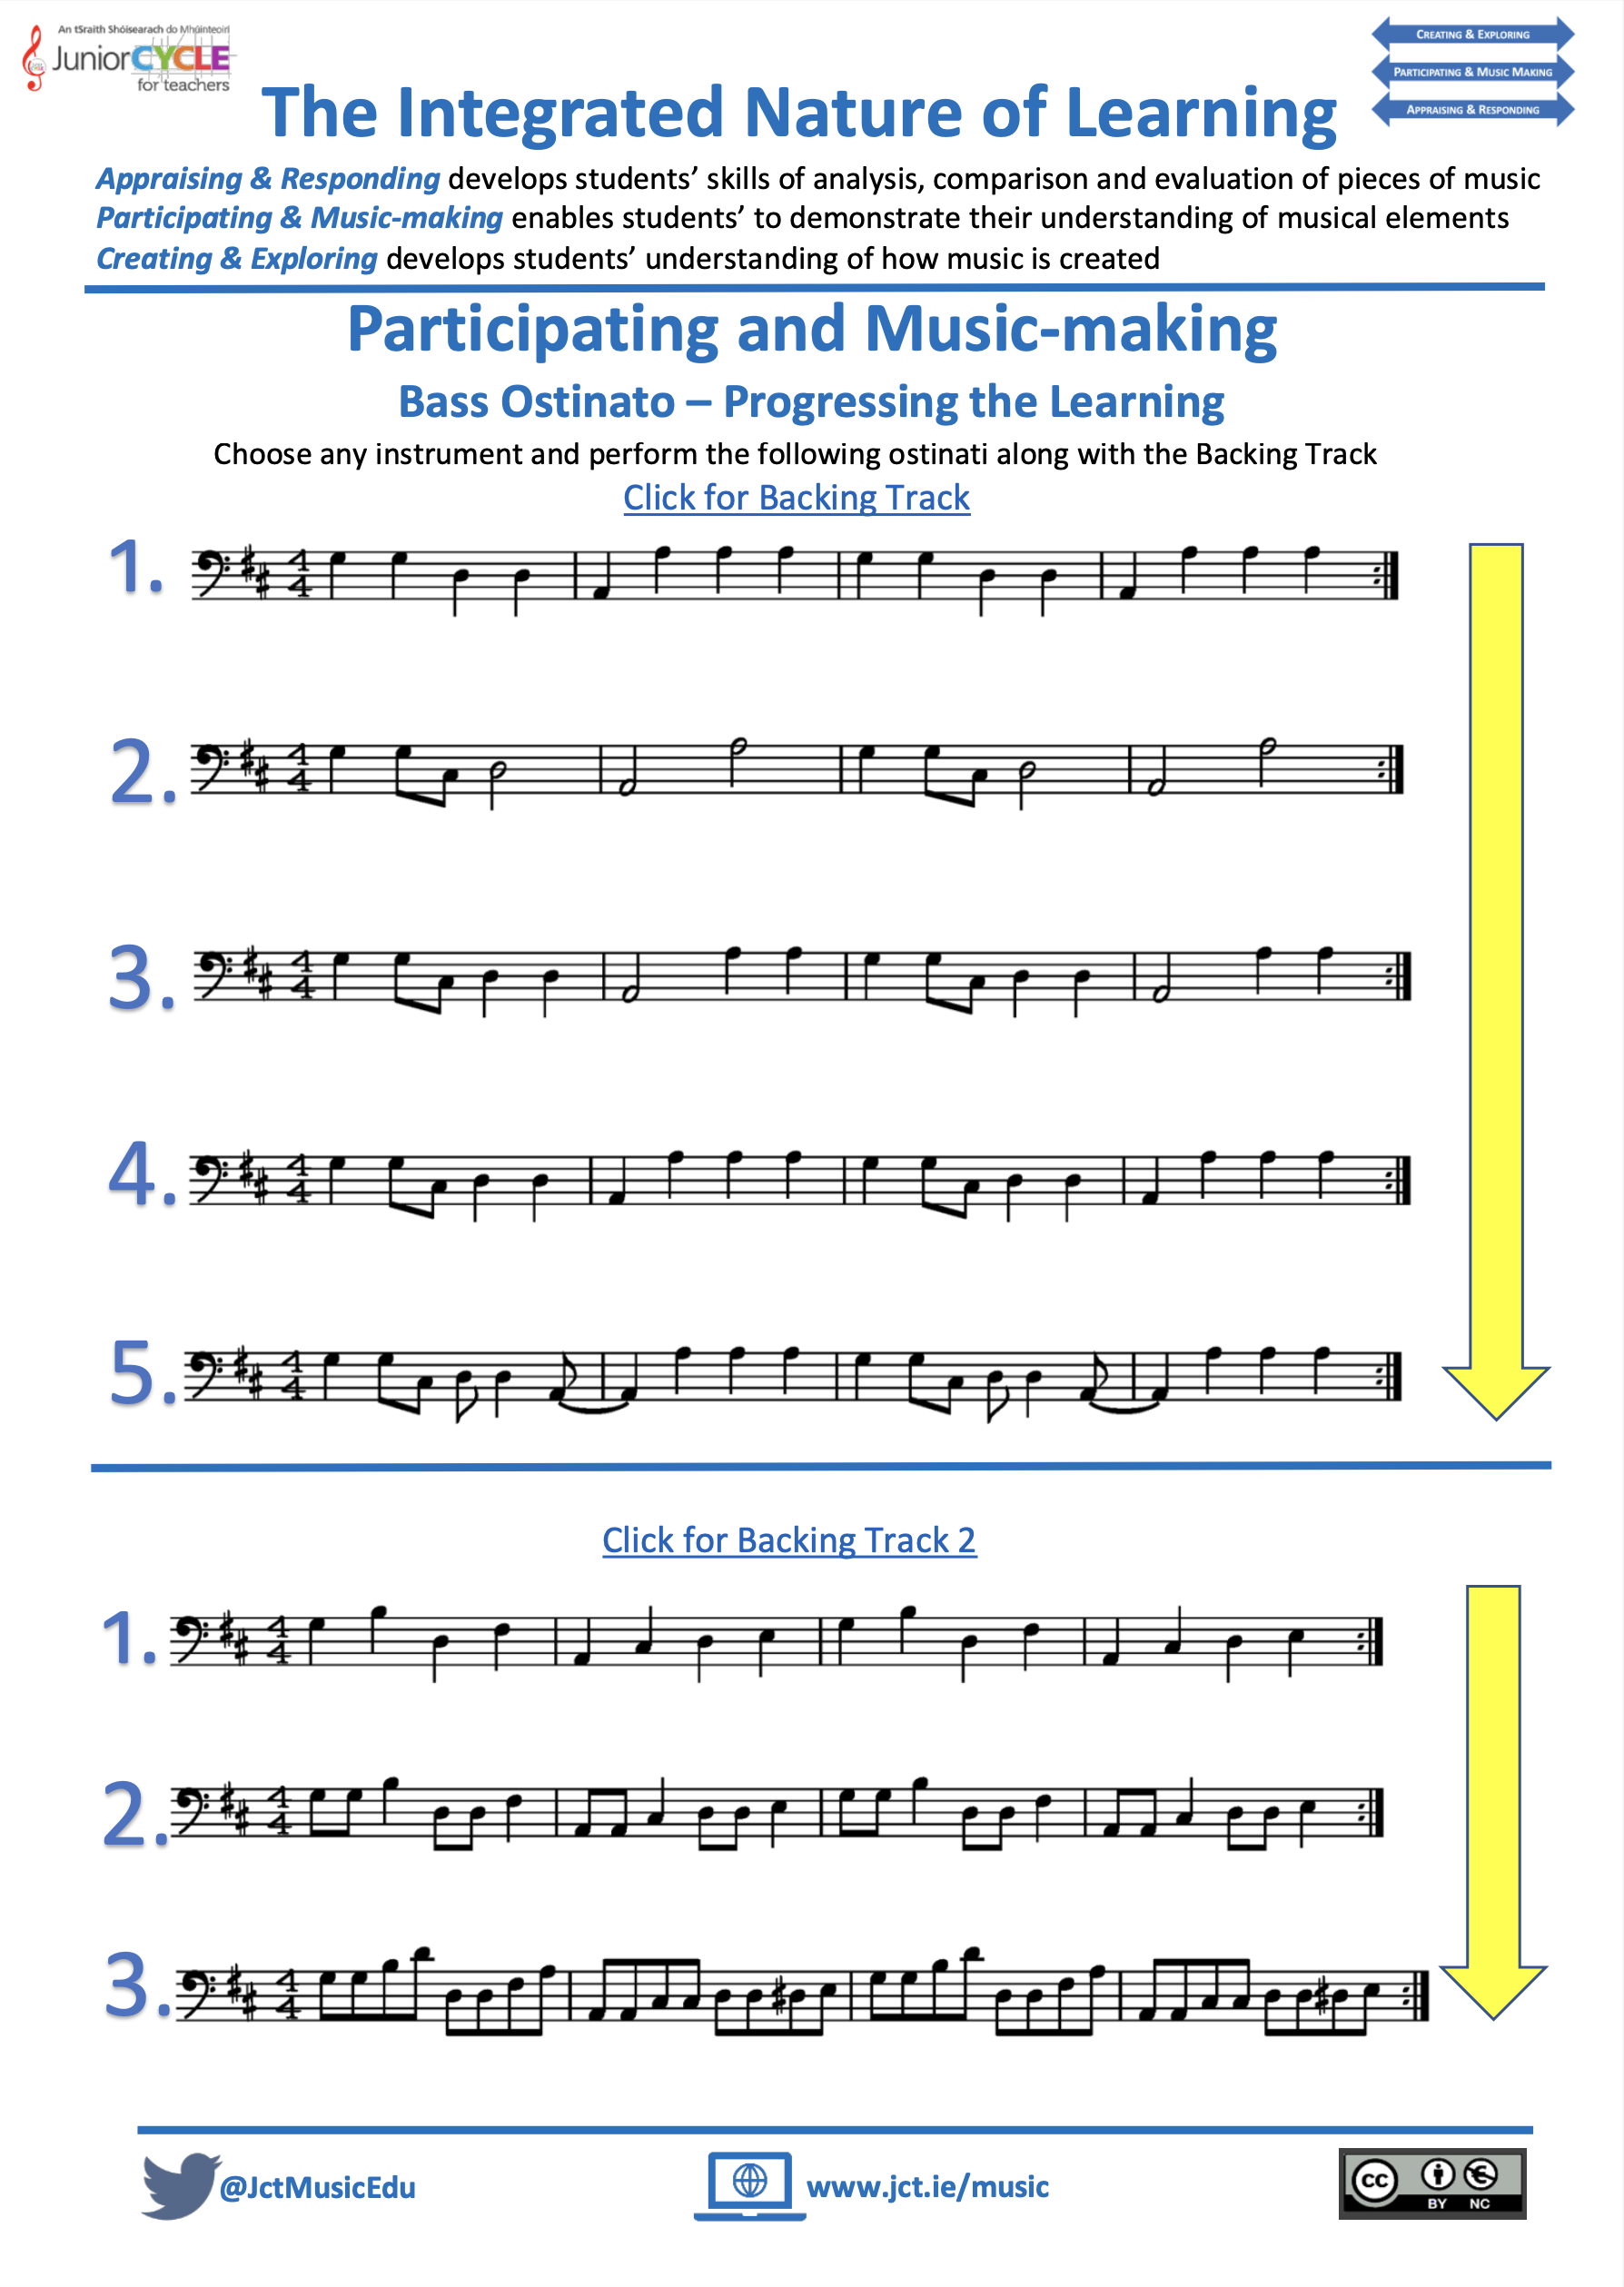 The Integrated Nature of Learning: Participating and Music-Making (Bass Ostinato)